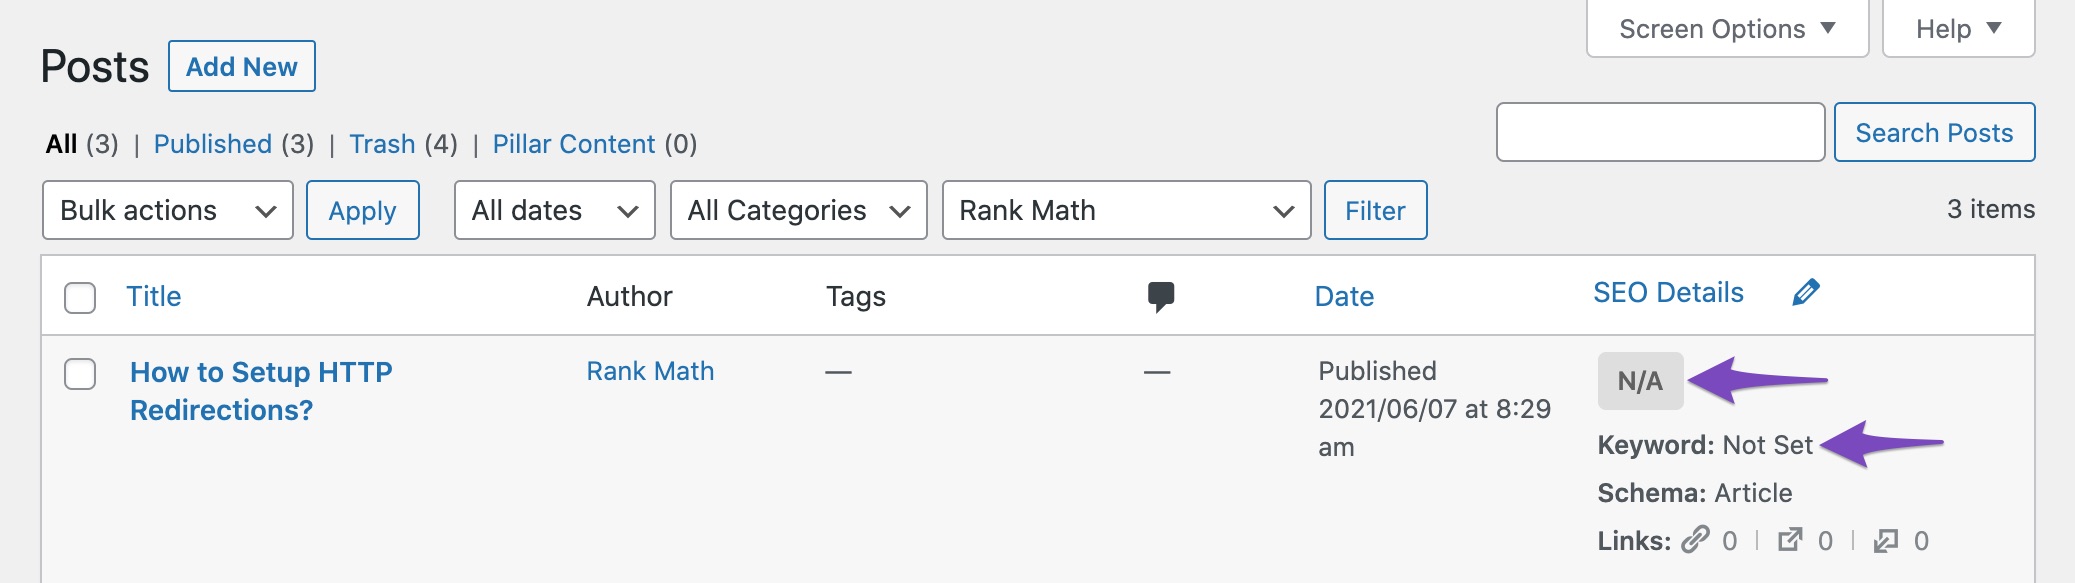 SEO score not available when focus keyword is not set